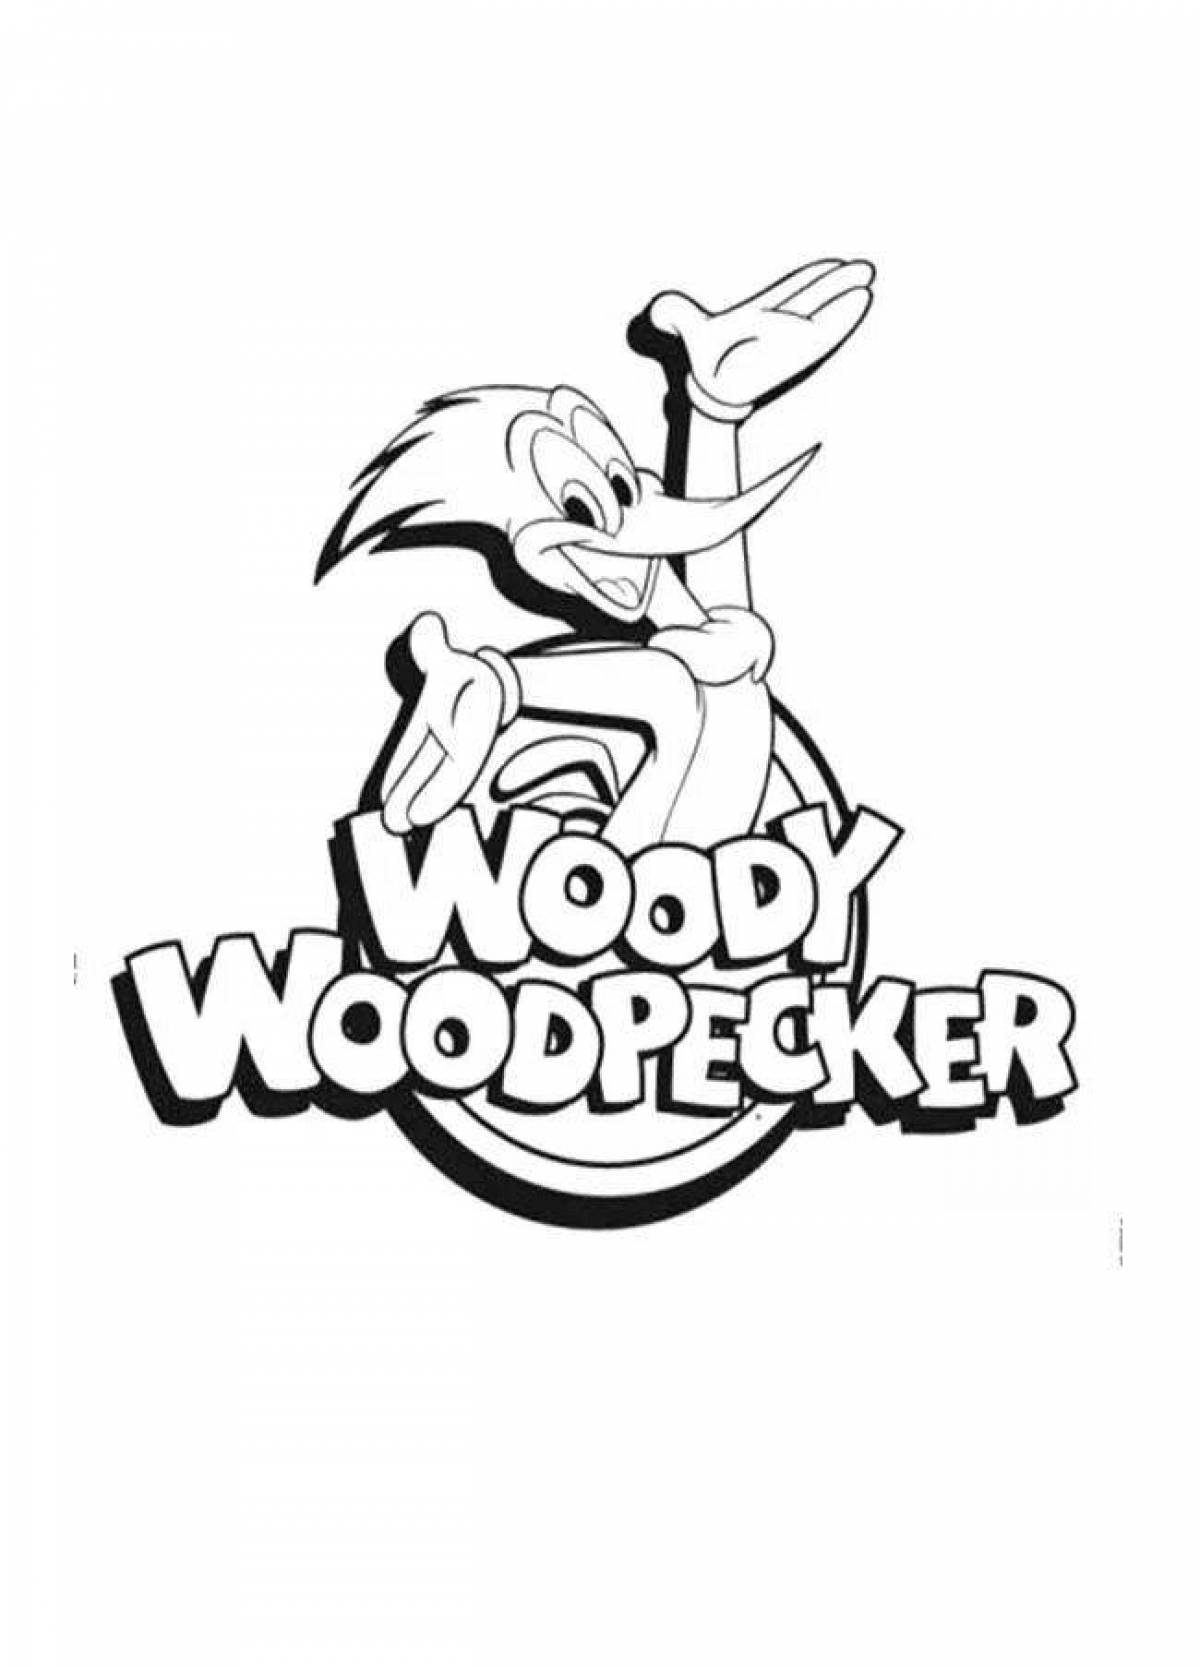 Funny woody woodpecker coloring book